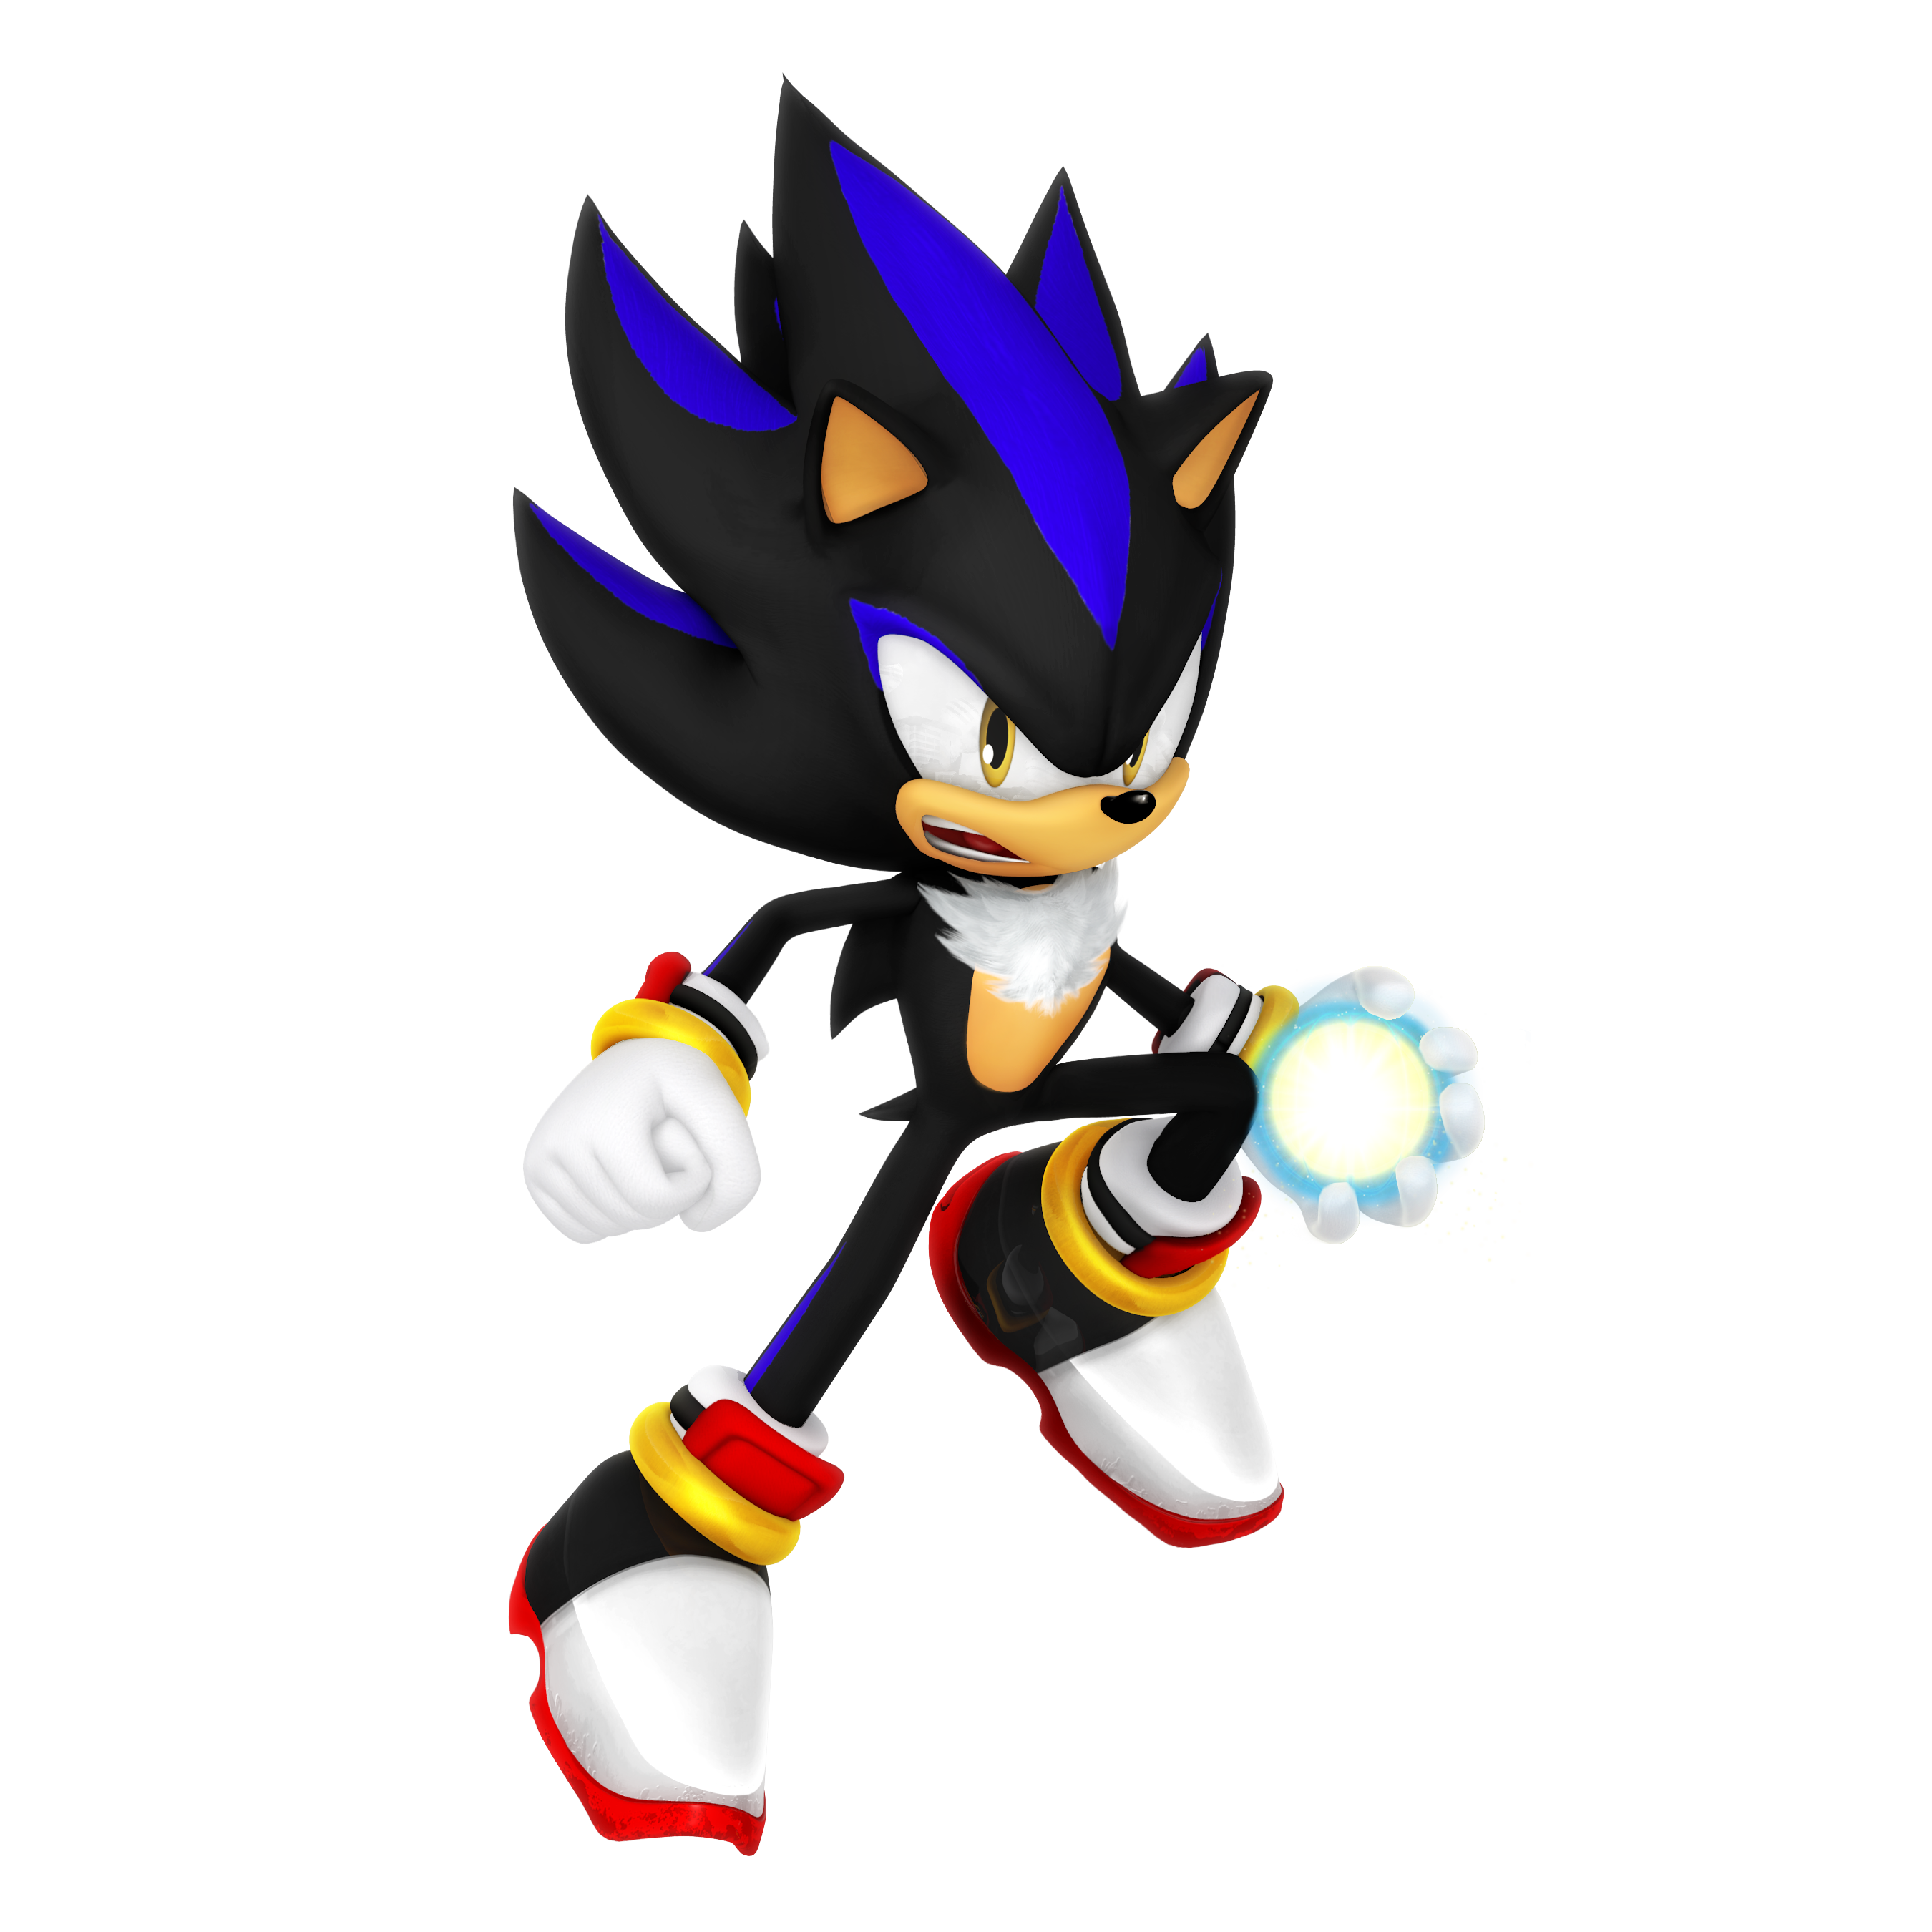 What if: Sonic and Shadow Fused, Sonow. by Nibroc-Rock on DeviantArt